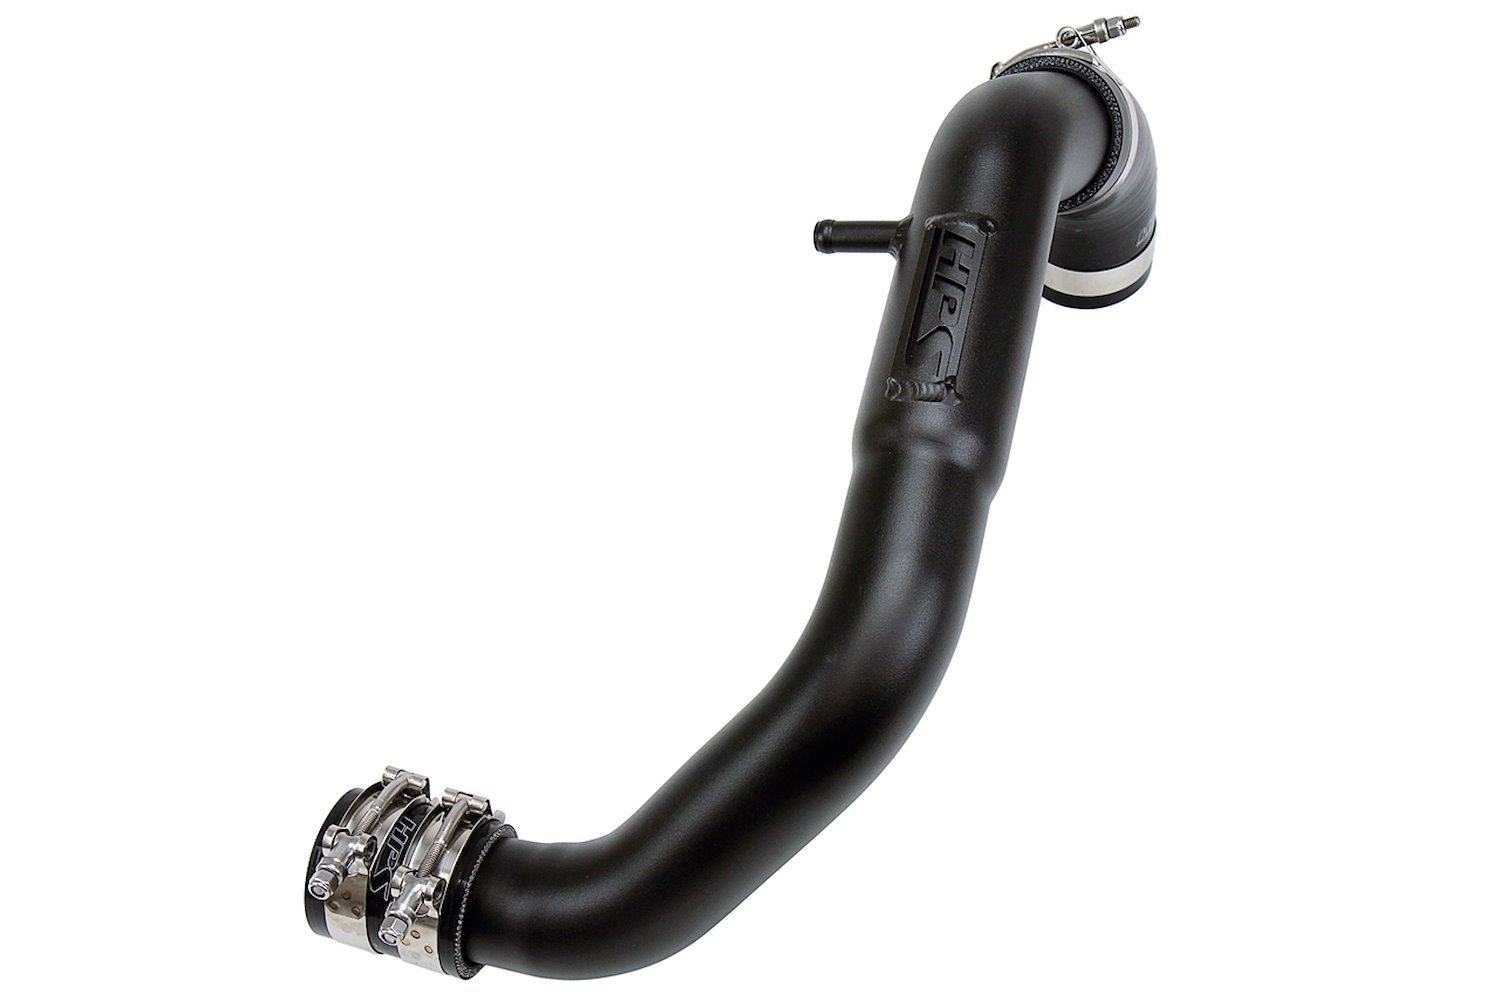 17-110WB Turbo Charge Pipe Kit, Dyno Proven +15 HP, +19 TQ, Reduce Turbo Lag, 2.5 in. Pipe